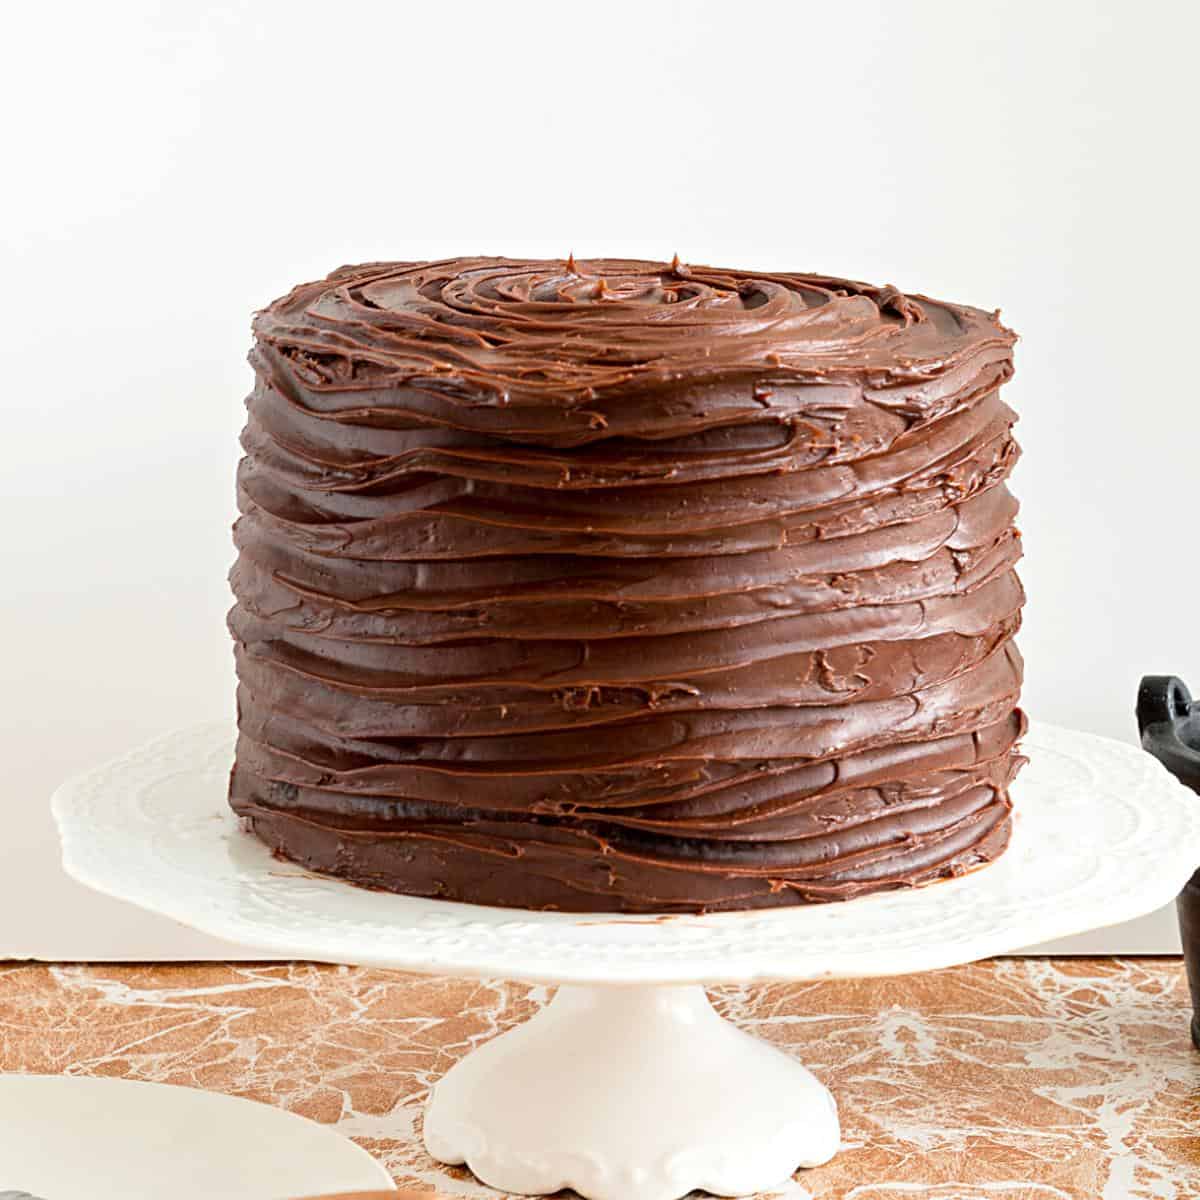 A ganache frosted chocolate cake.